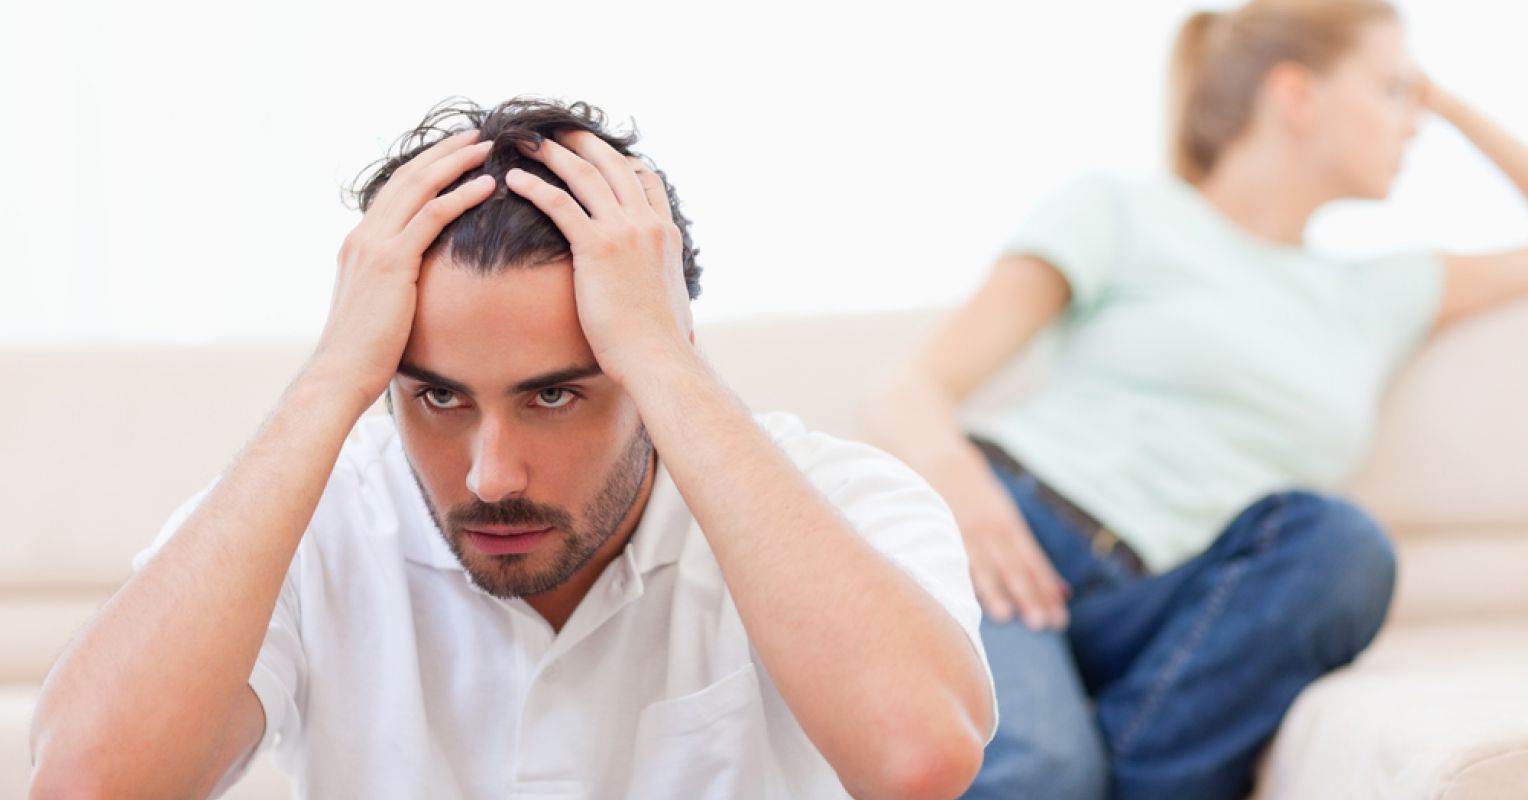 Toxic Relationships: The Causes, Early Warning Signs, and If You